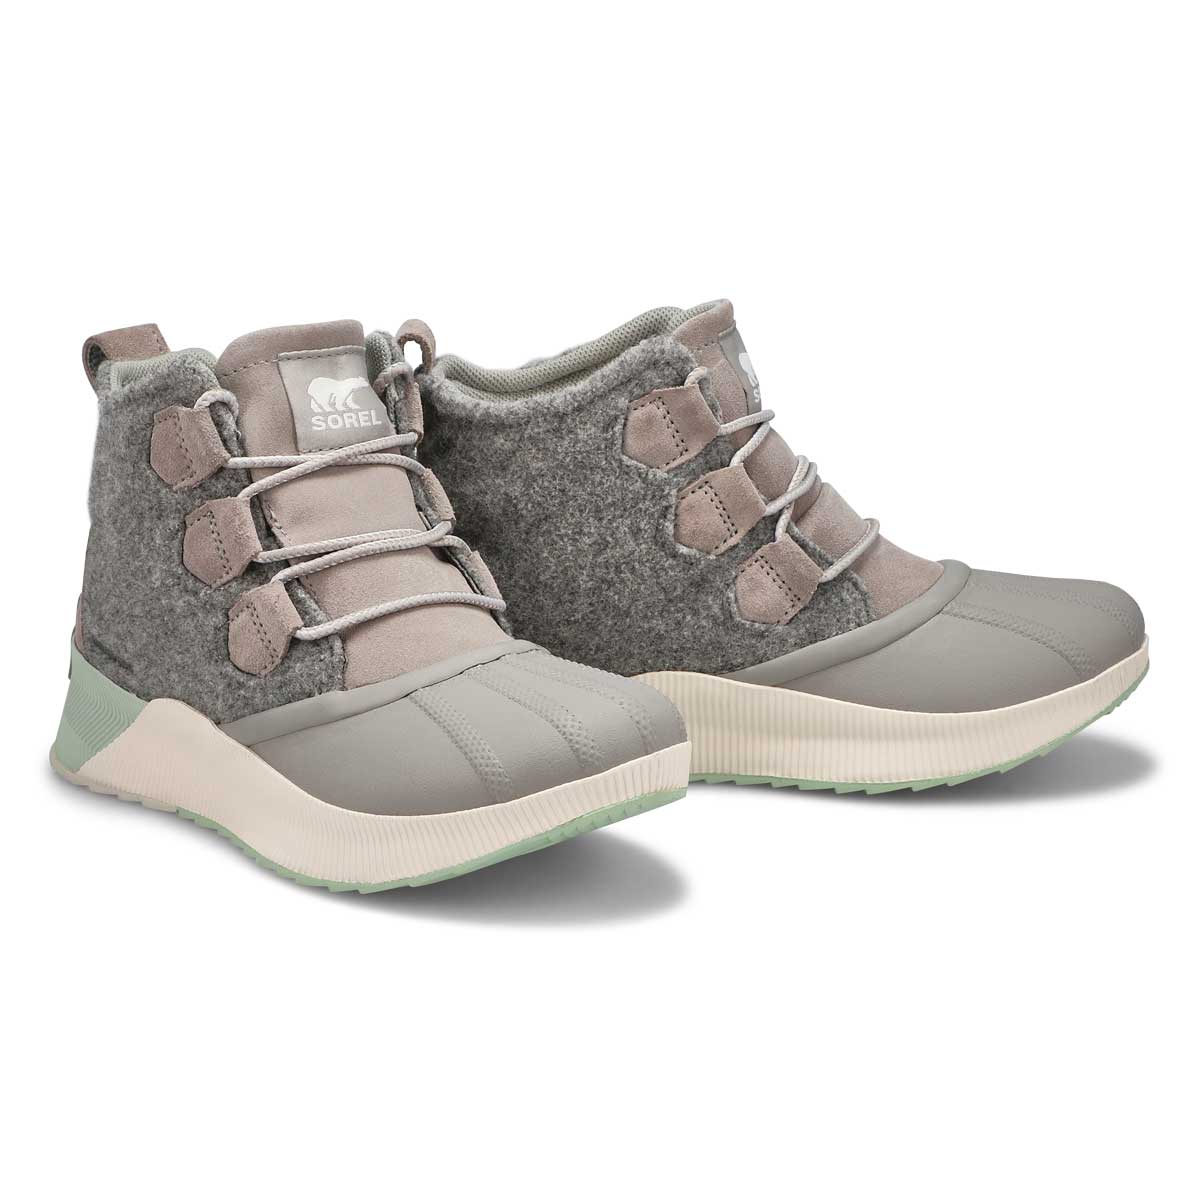 Women's Out' N About III Waterproof Boot - Dove